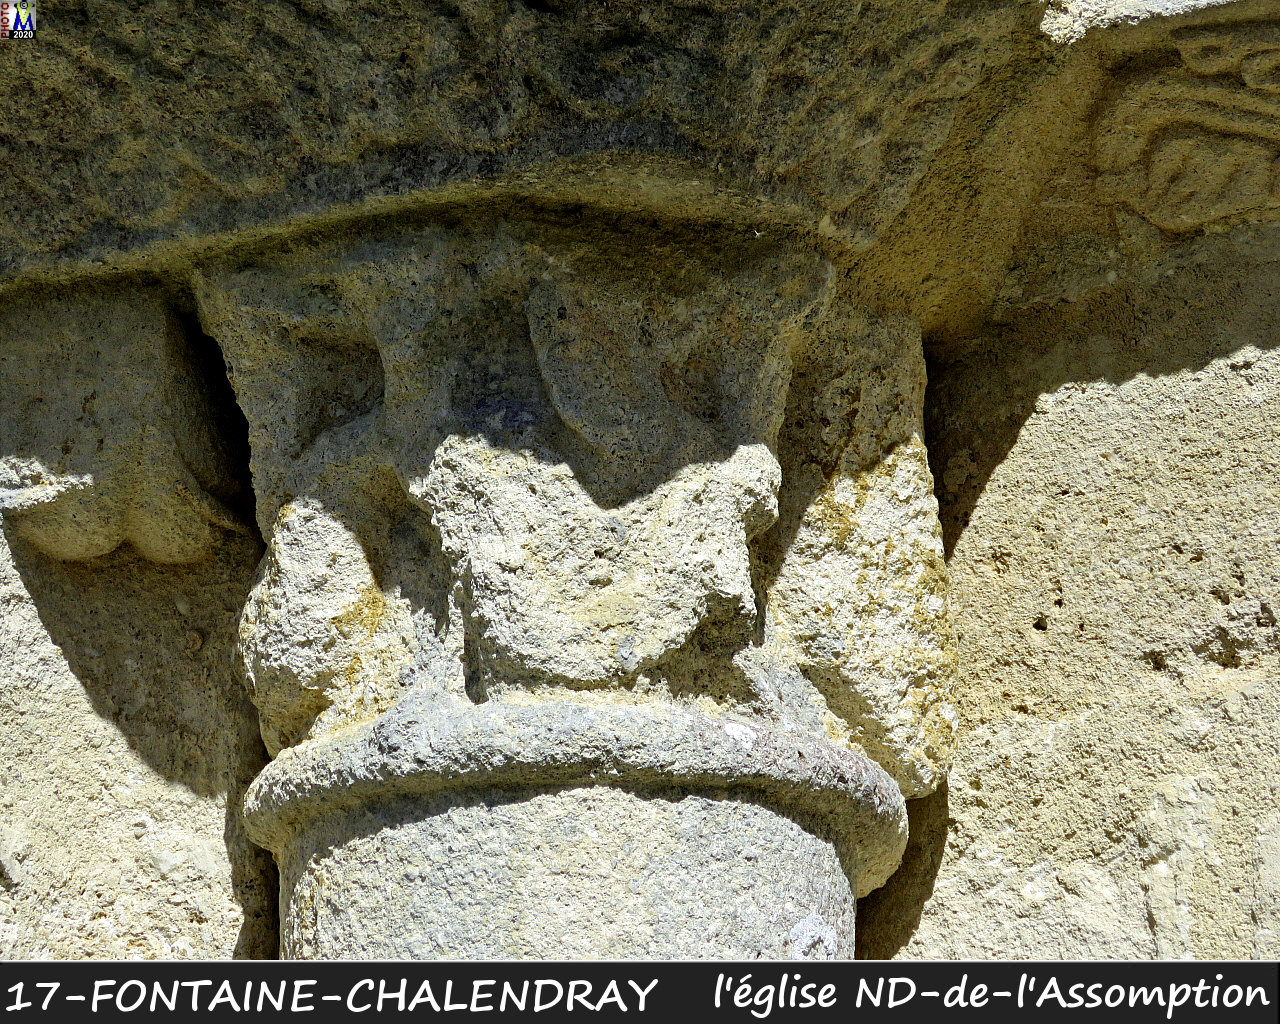 17FONTAINE-CHALENDRAY_eglise_1034.jpg